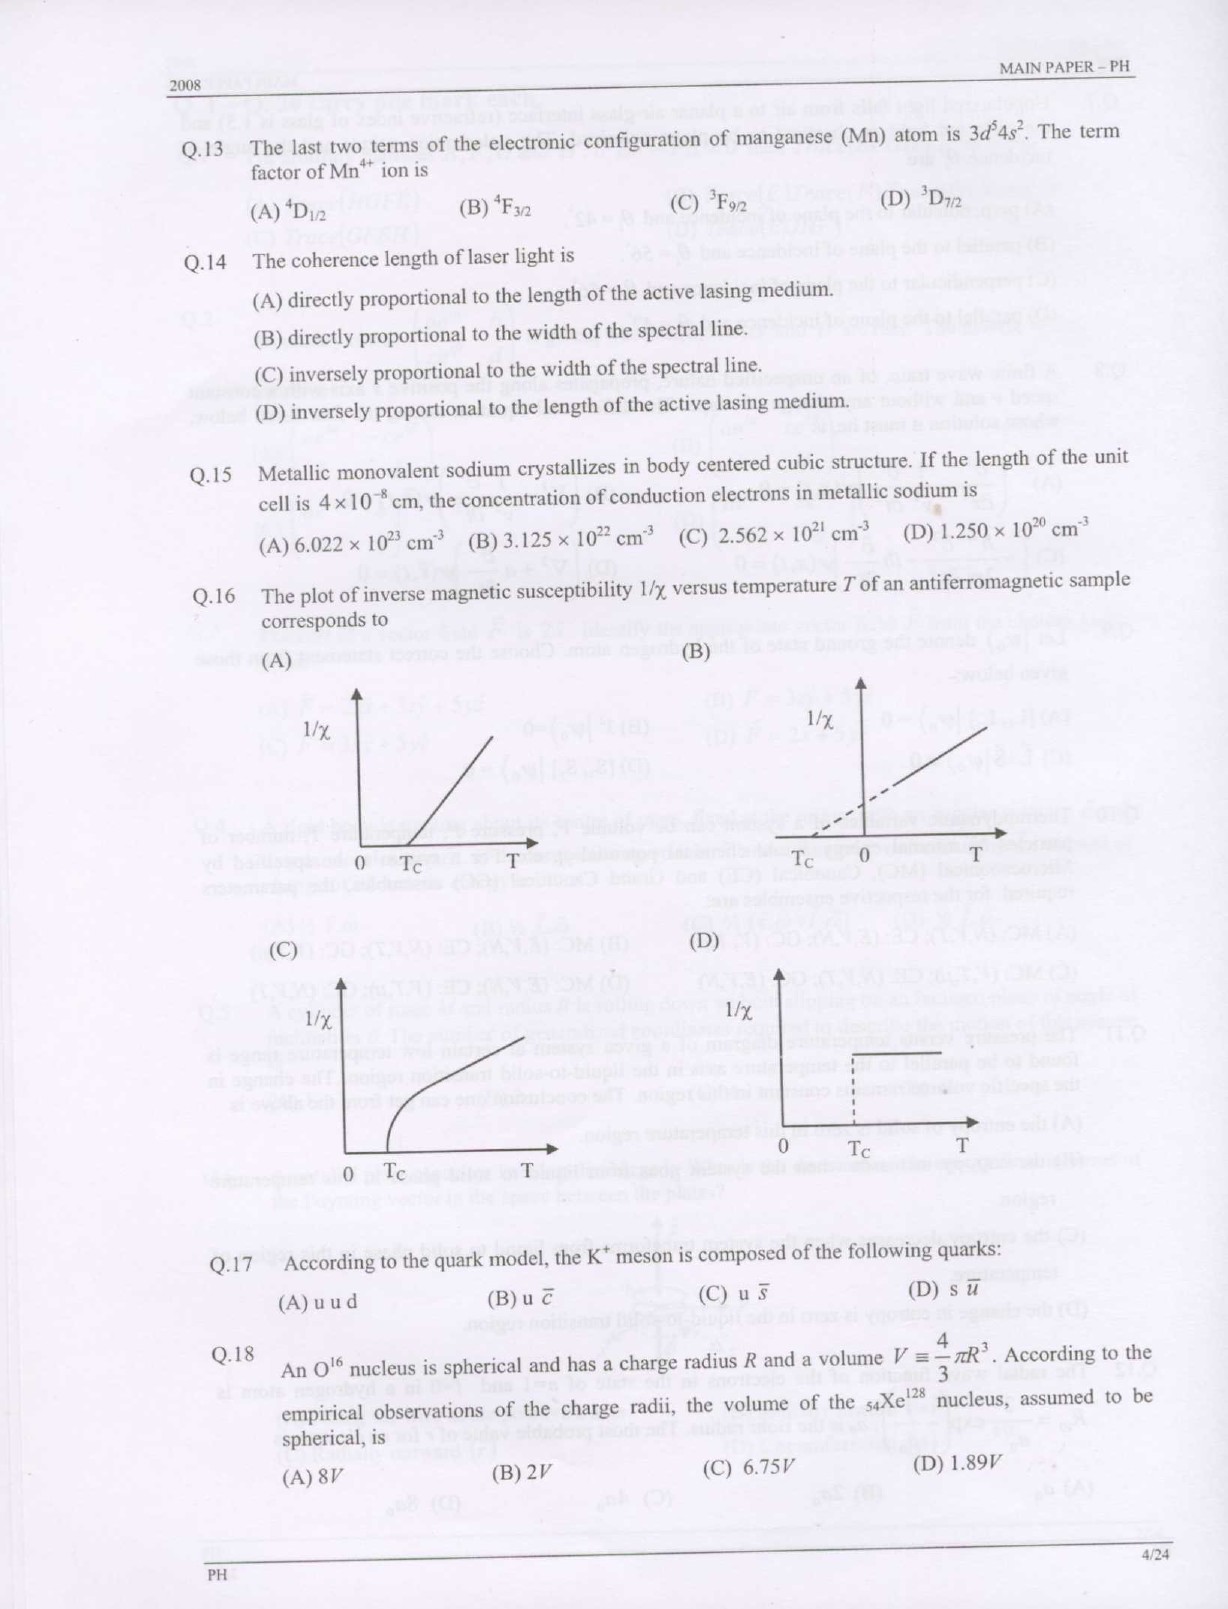 GATE Exam Question Paper 2008 Physics 4